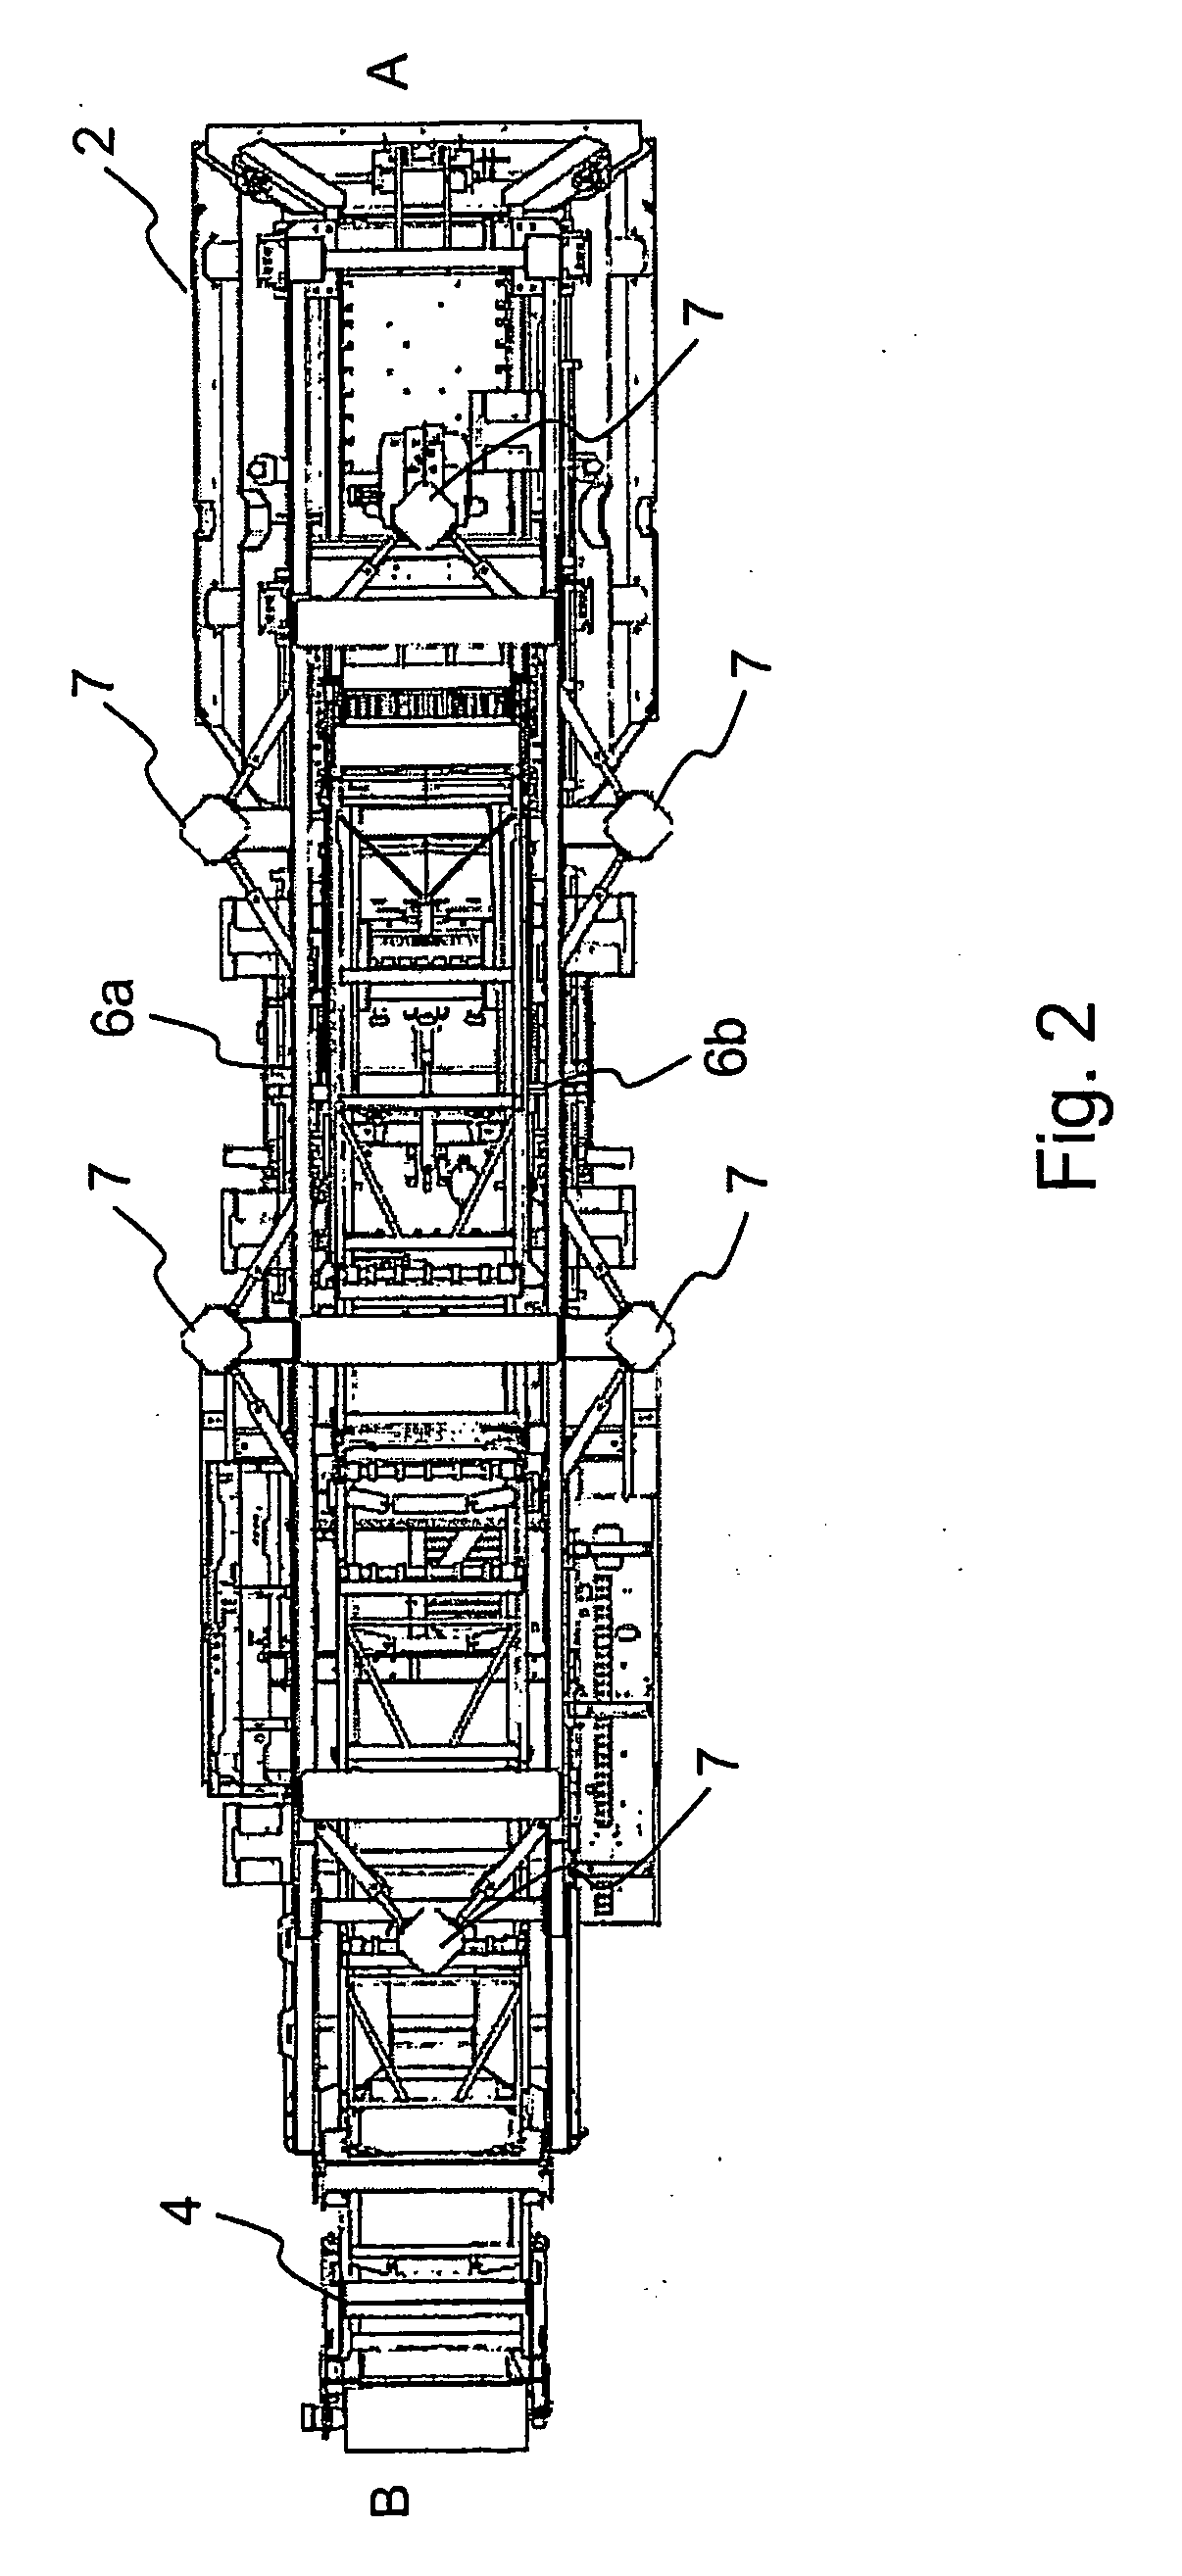 Method for moving a material processing device, a device for processing mineral material, and a frame for a processing device